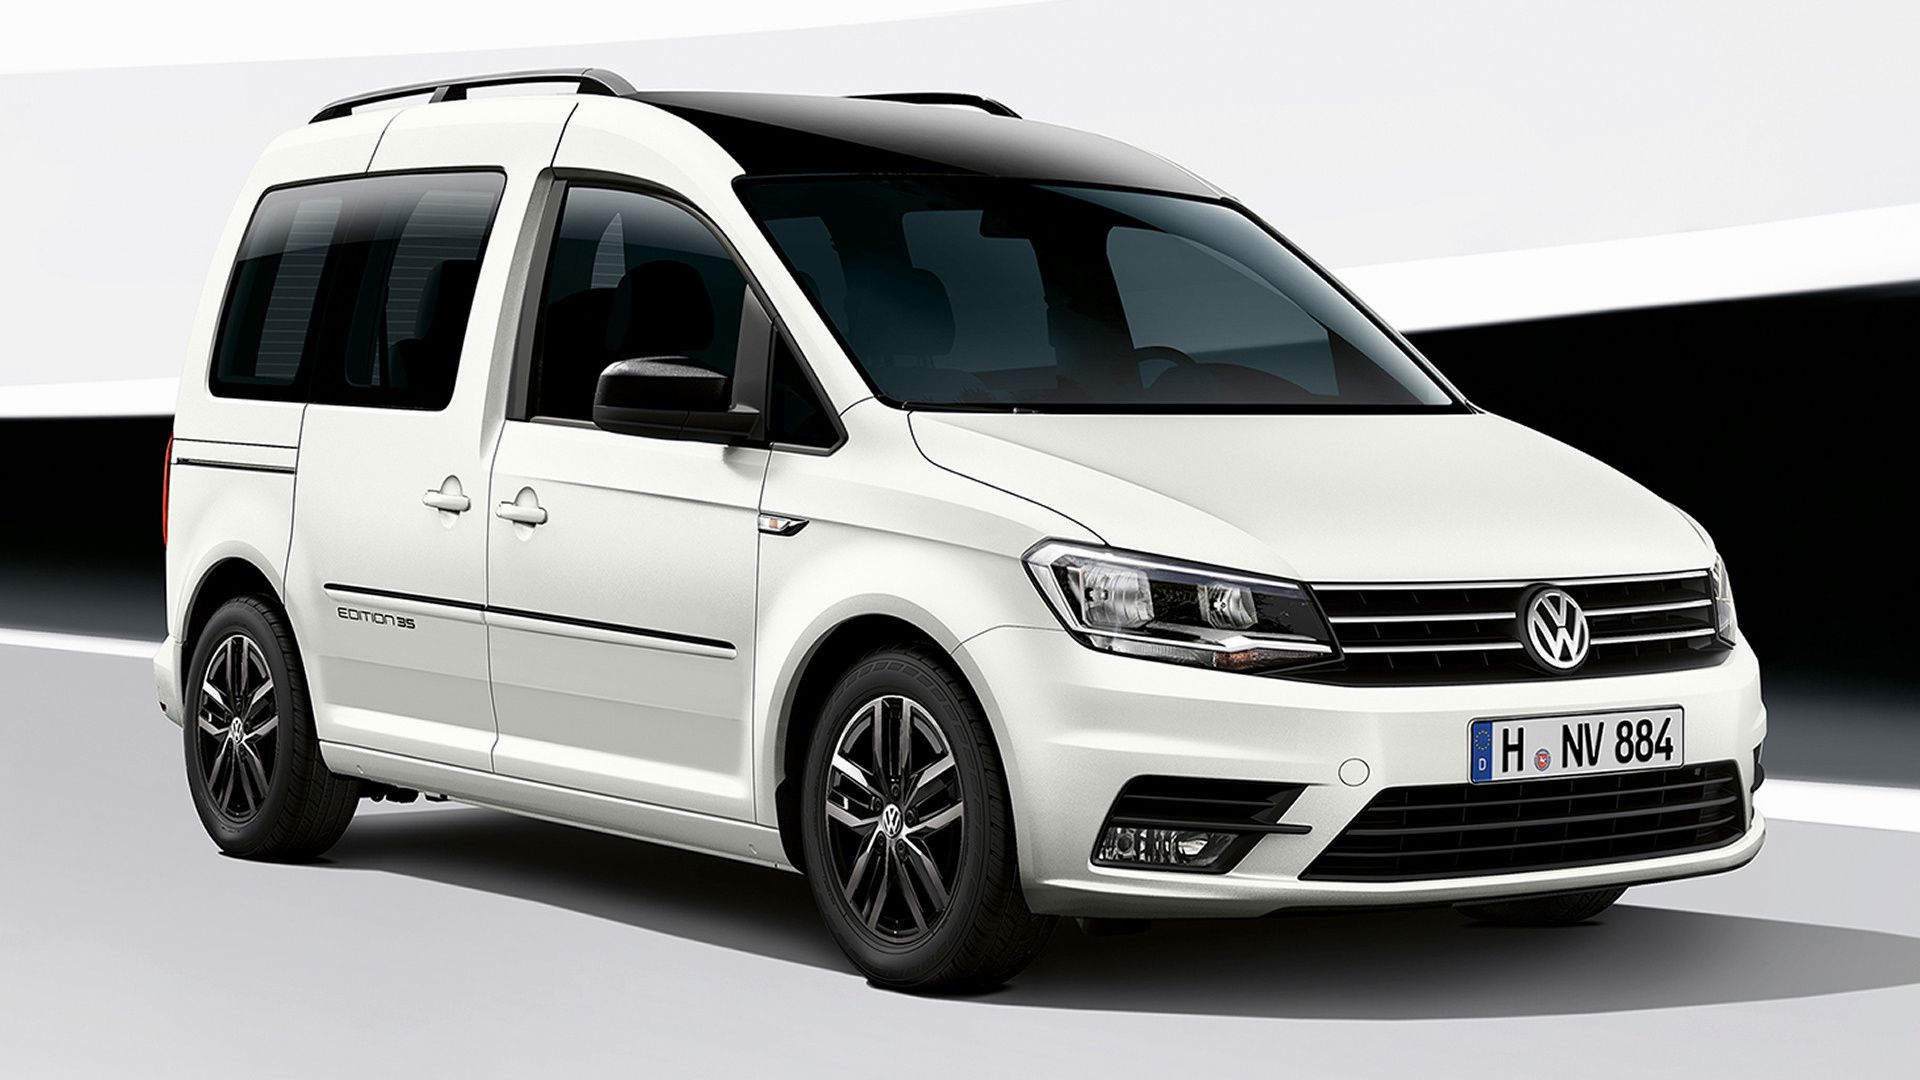 Volkswagen Caddy Edition 35 and HD Image